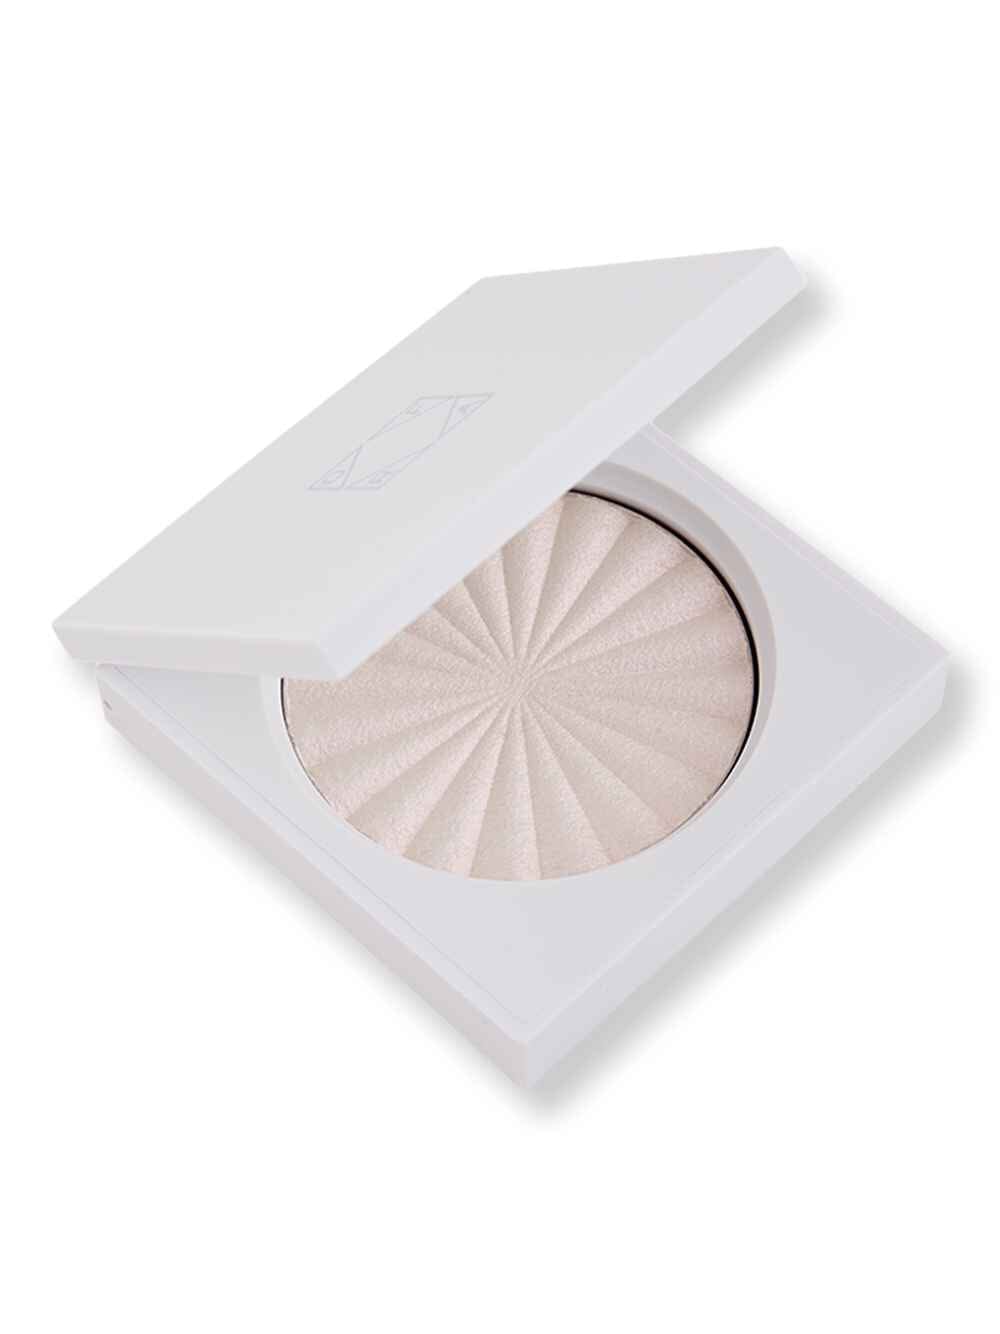 OFRA Cosmetics OFRA Cosmetics Highlighter 10 gCloud 9 Highlighters 